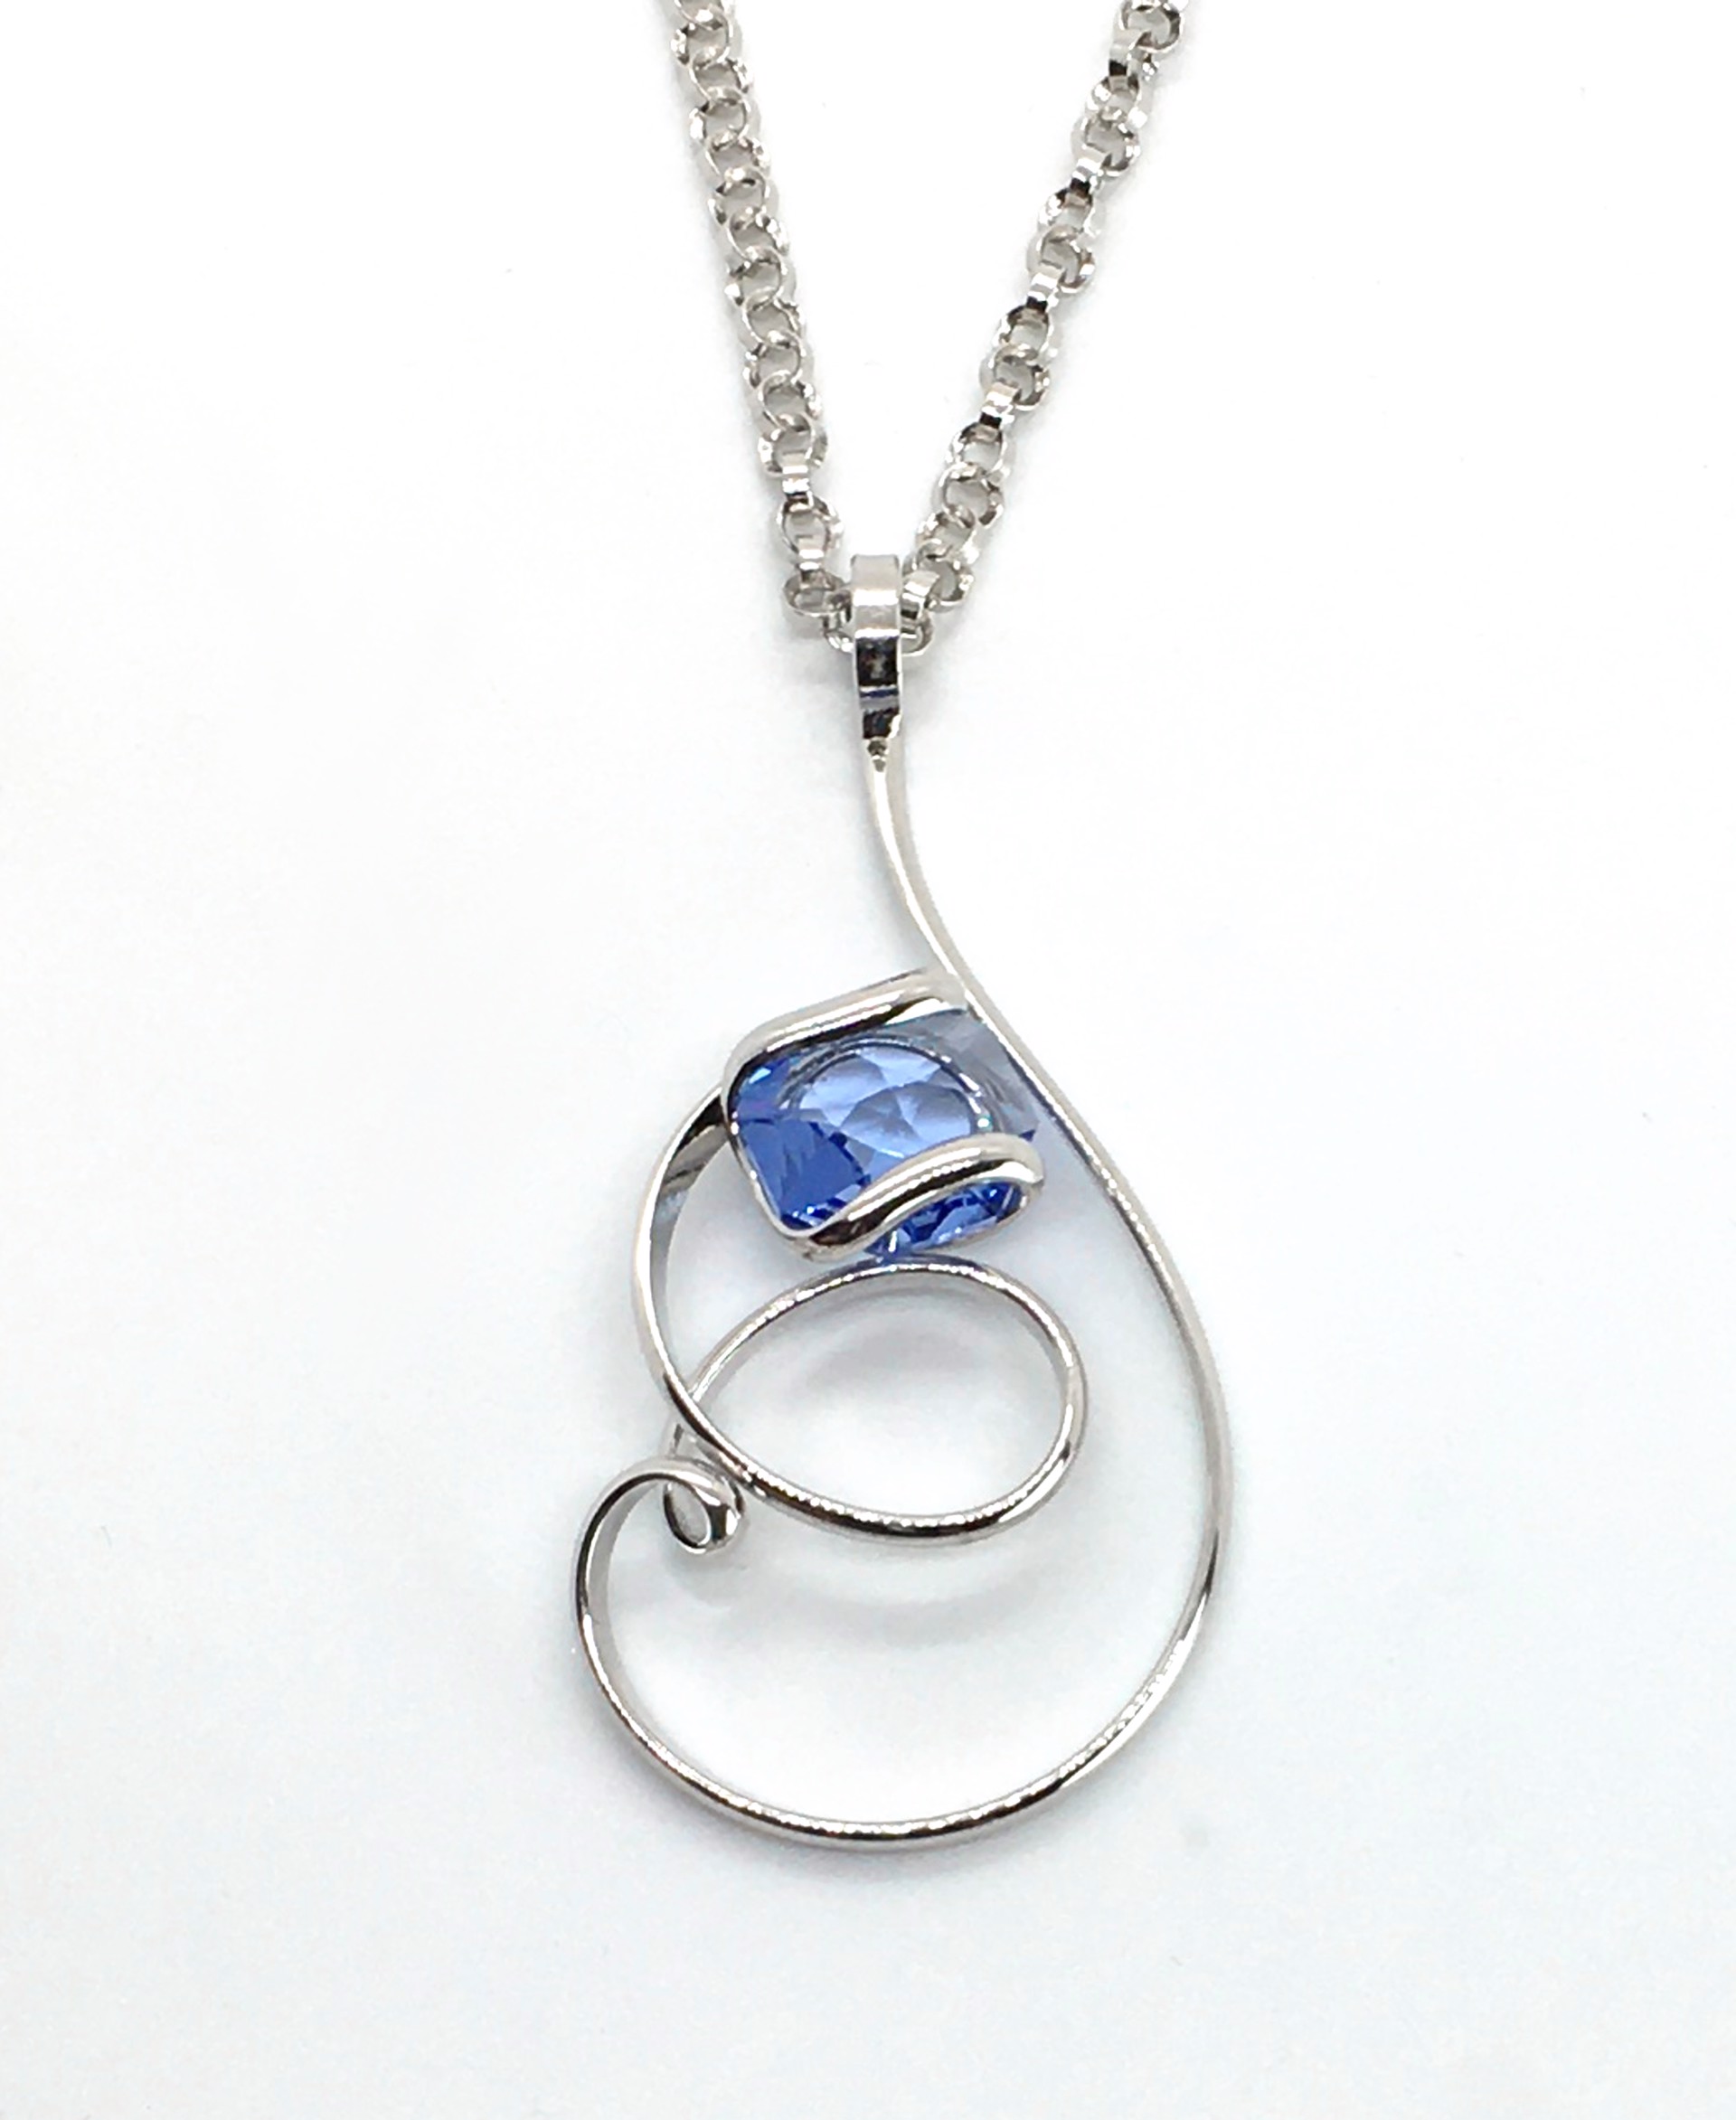 Pendant ~ Sapphire Austrian Swarovski Crystal ~ Triple Plated Rhodium ~ Handmade Setting ~ Chain Available Separately by Monique Touber